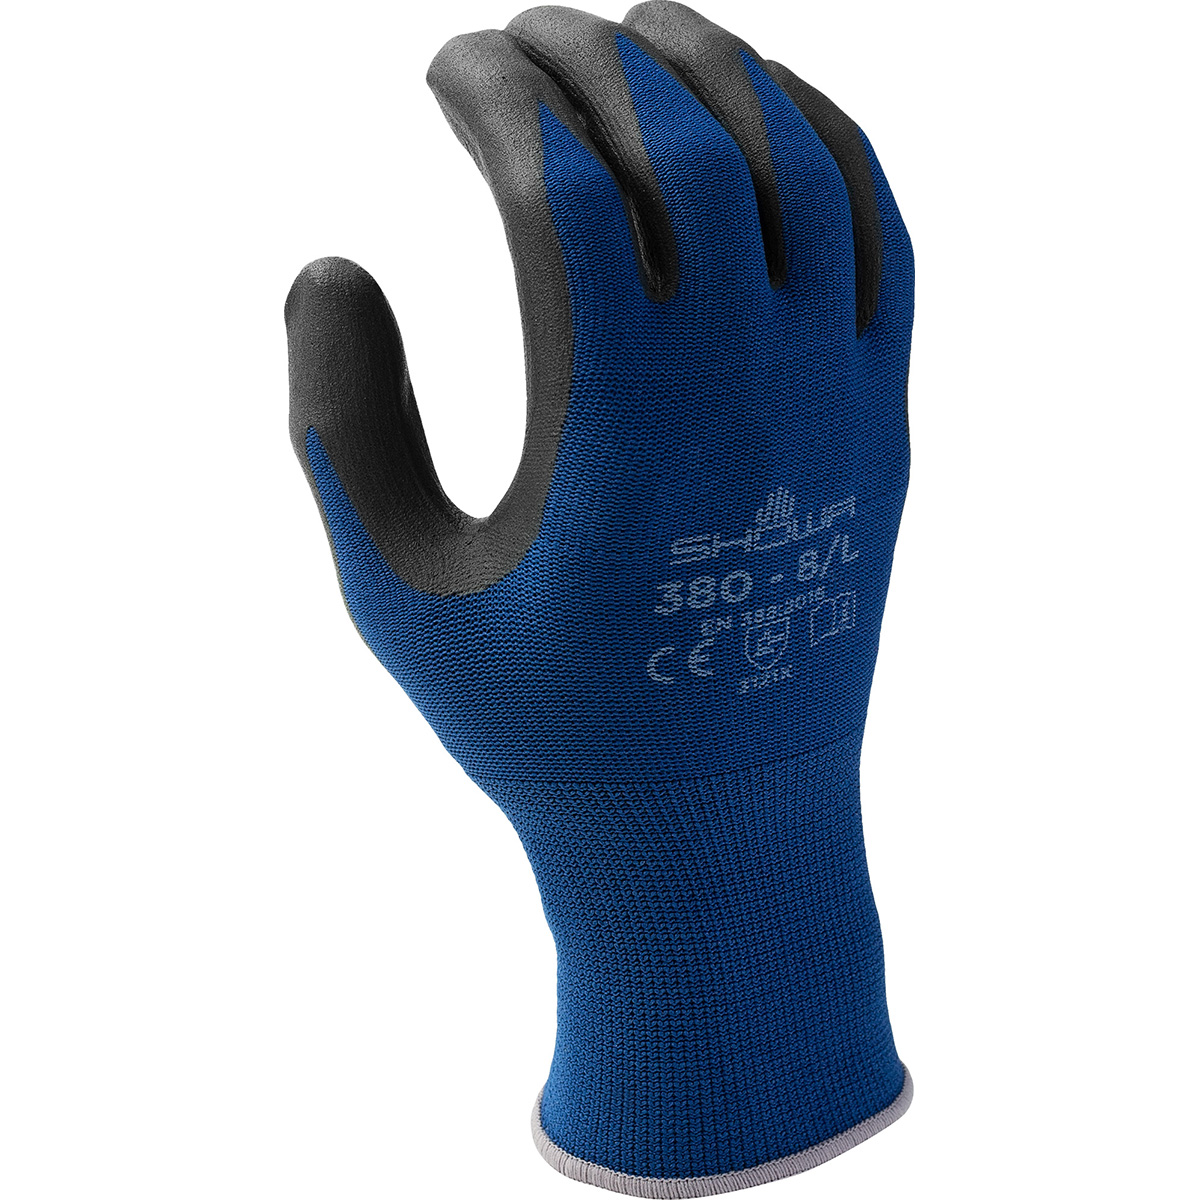 General purpose patented waffle pattern foamed nitrile-coated, palm dipped, blue w/black coating, 13 gauge seamless, knitted liner, medium